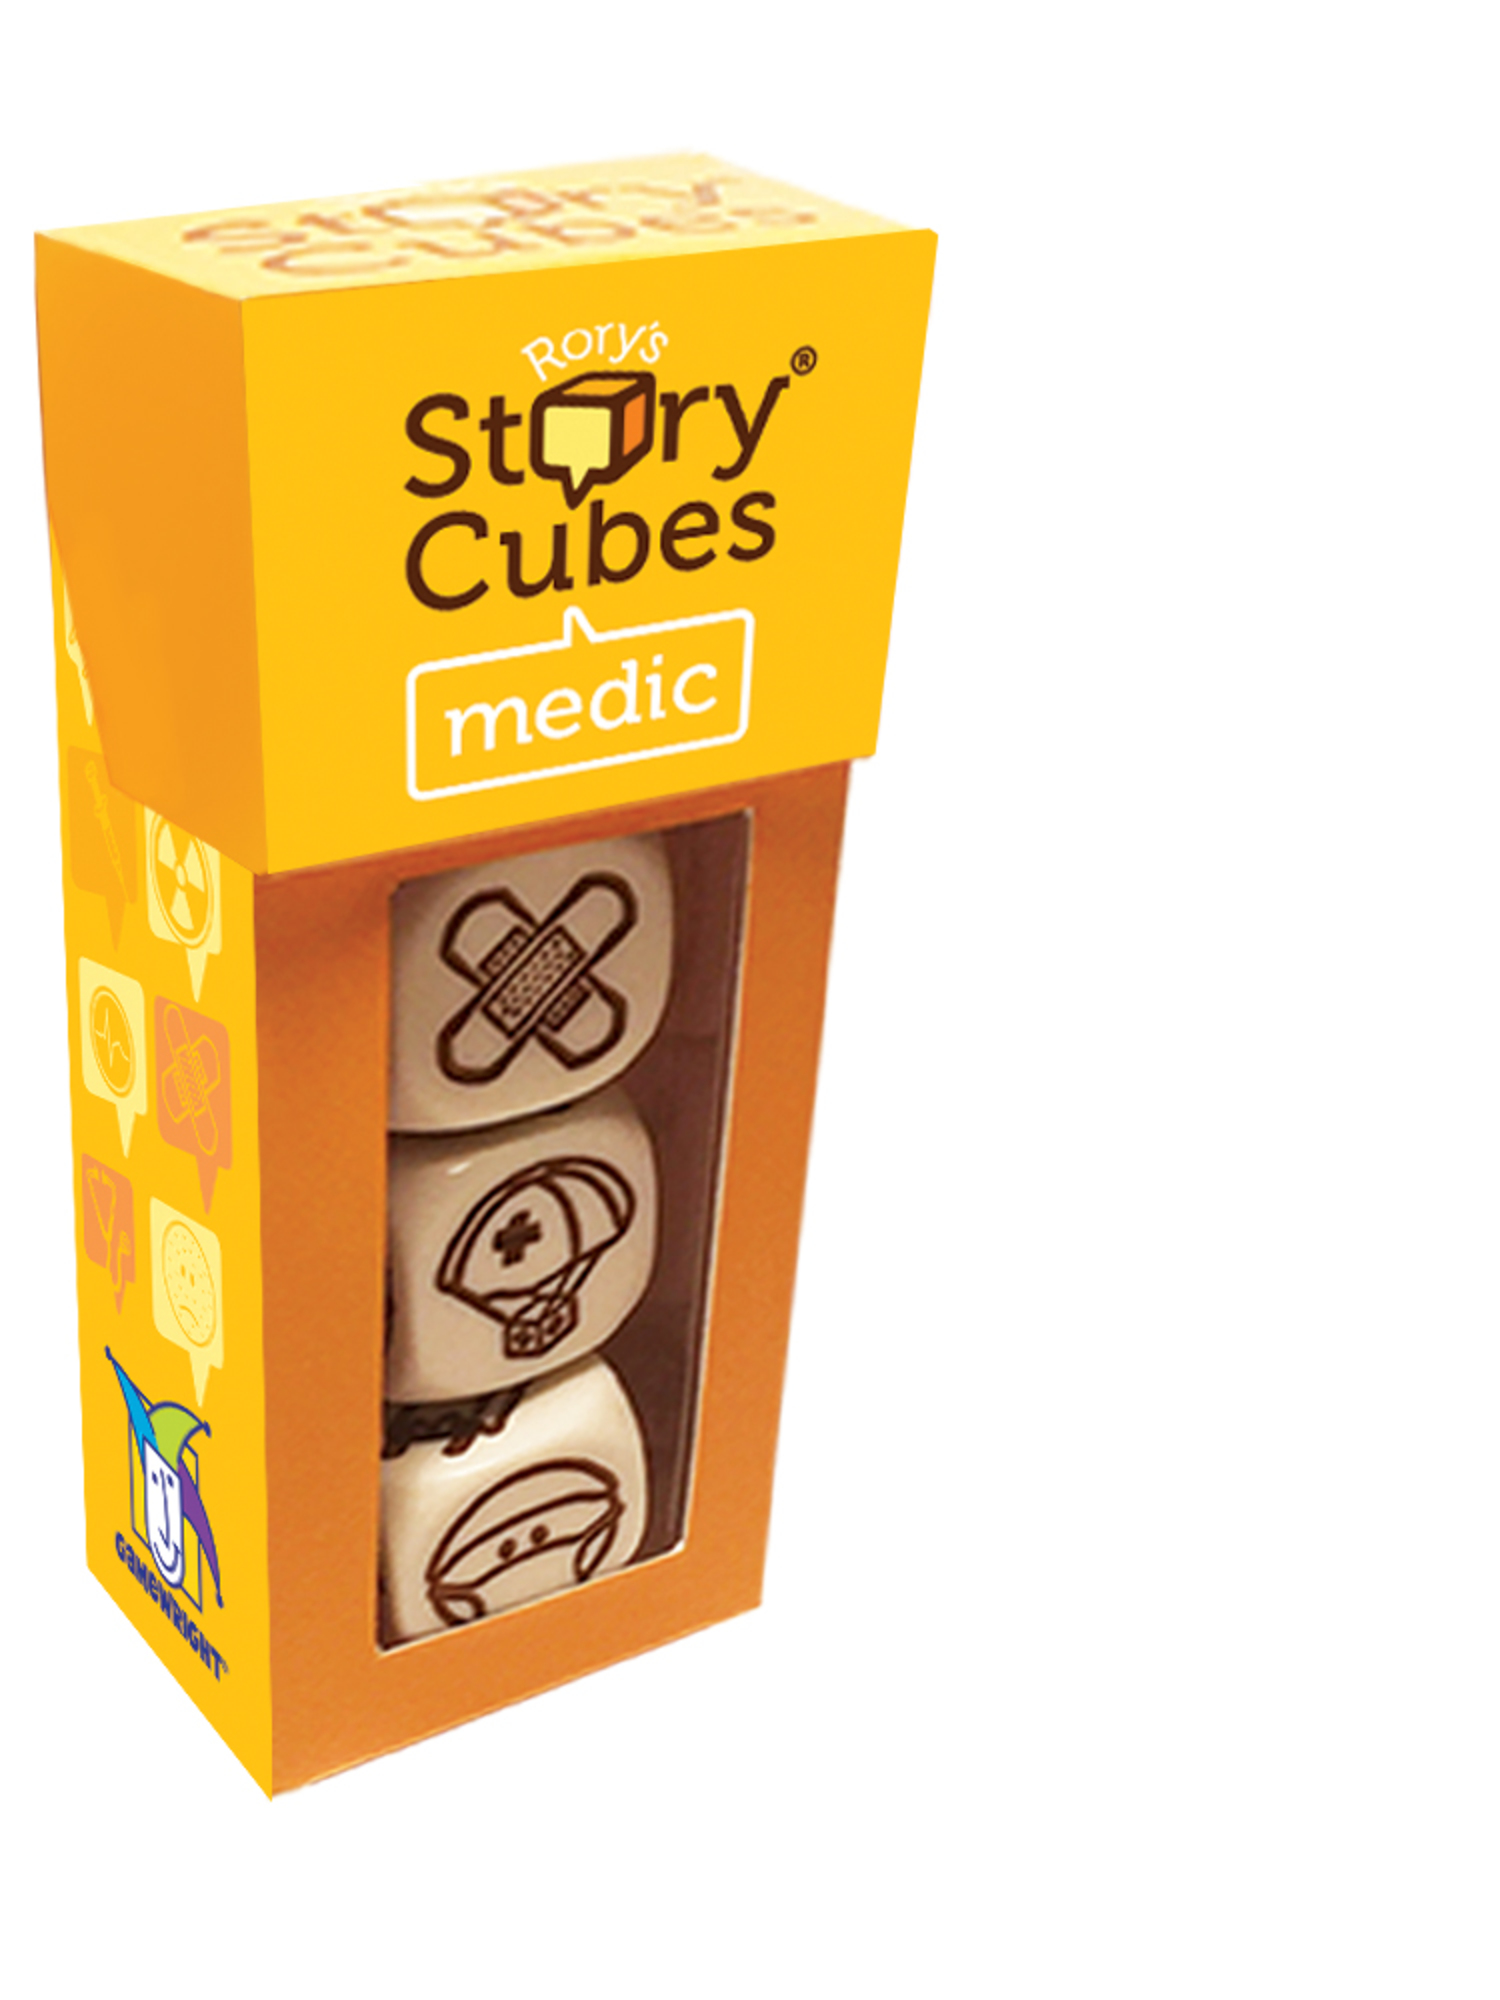 Gamewright Rory's Story Cubes Medic Dice Game 